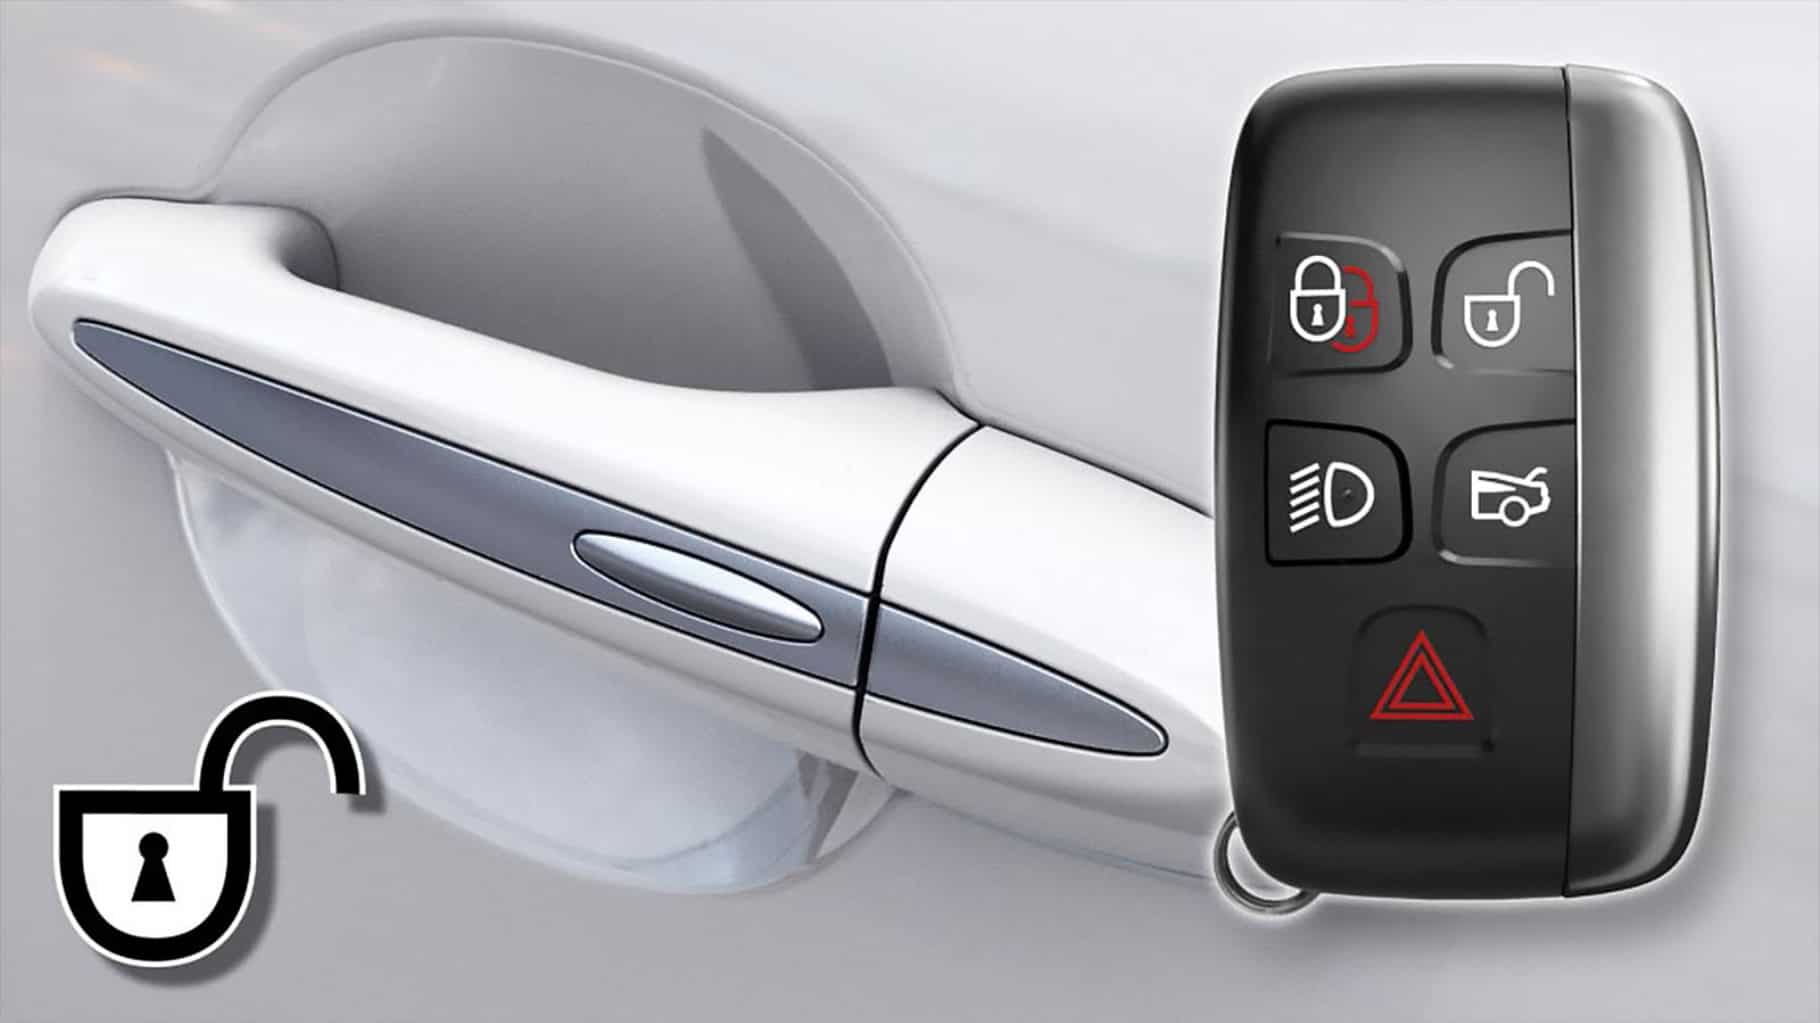 Jaguar's Key Fob and door handle, for the Keyless Entry and Keyless Locking.